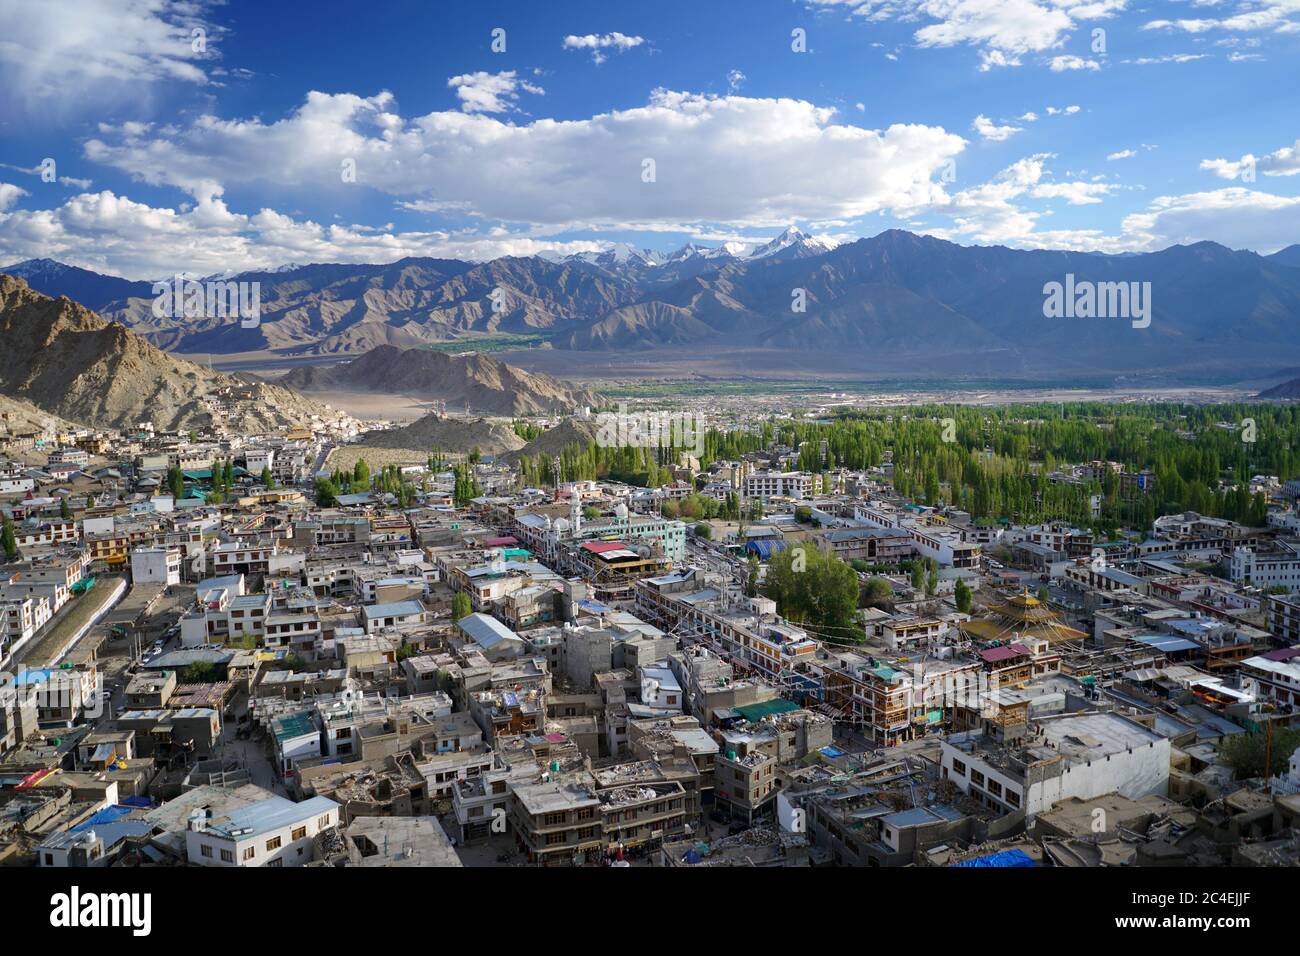 Leh Ladakh City View, Blue Sky With Clouds And Mountai, Ladakh India Stock Photo